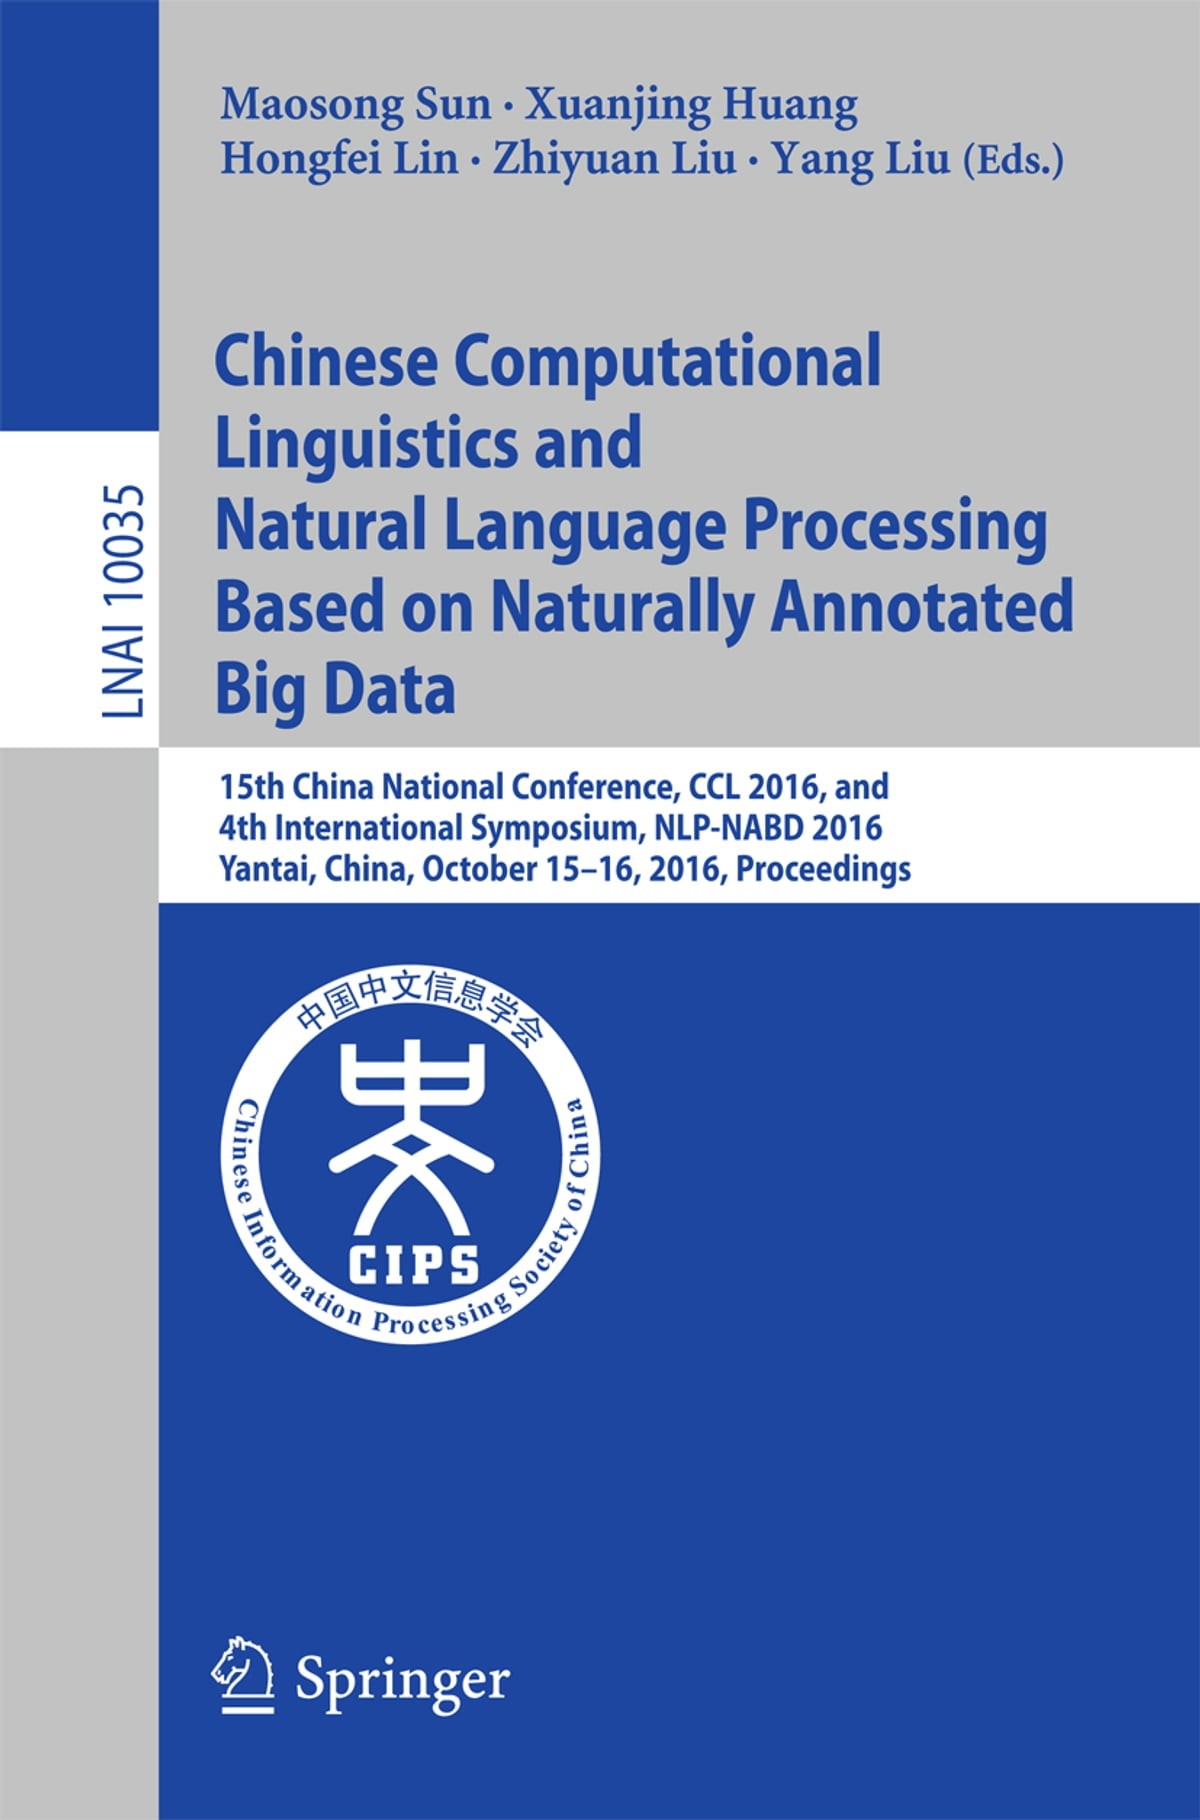 Chinese Computational Linguistics and Natural Language Processing Based on Naturally Annotated Big Data: 15th China National Conference, CCL 2016, and 4th International Symposium, NLP-NABD 2016, Yantai, China, October 15-16, 2016, Proceedings